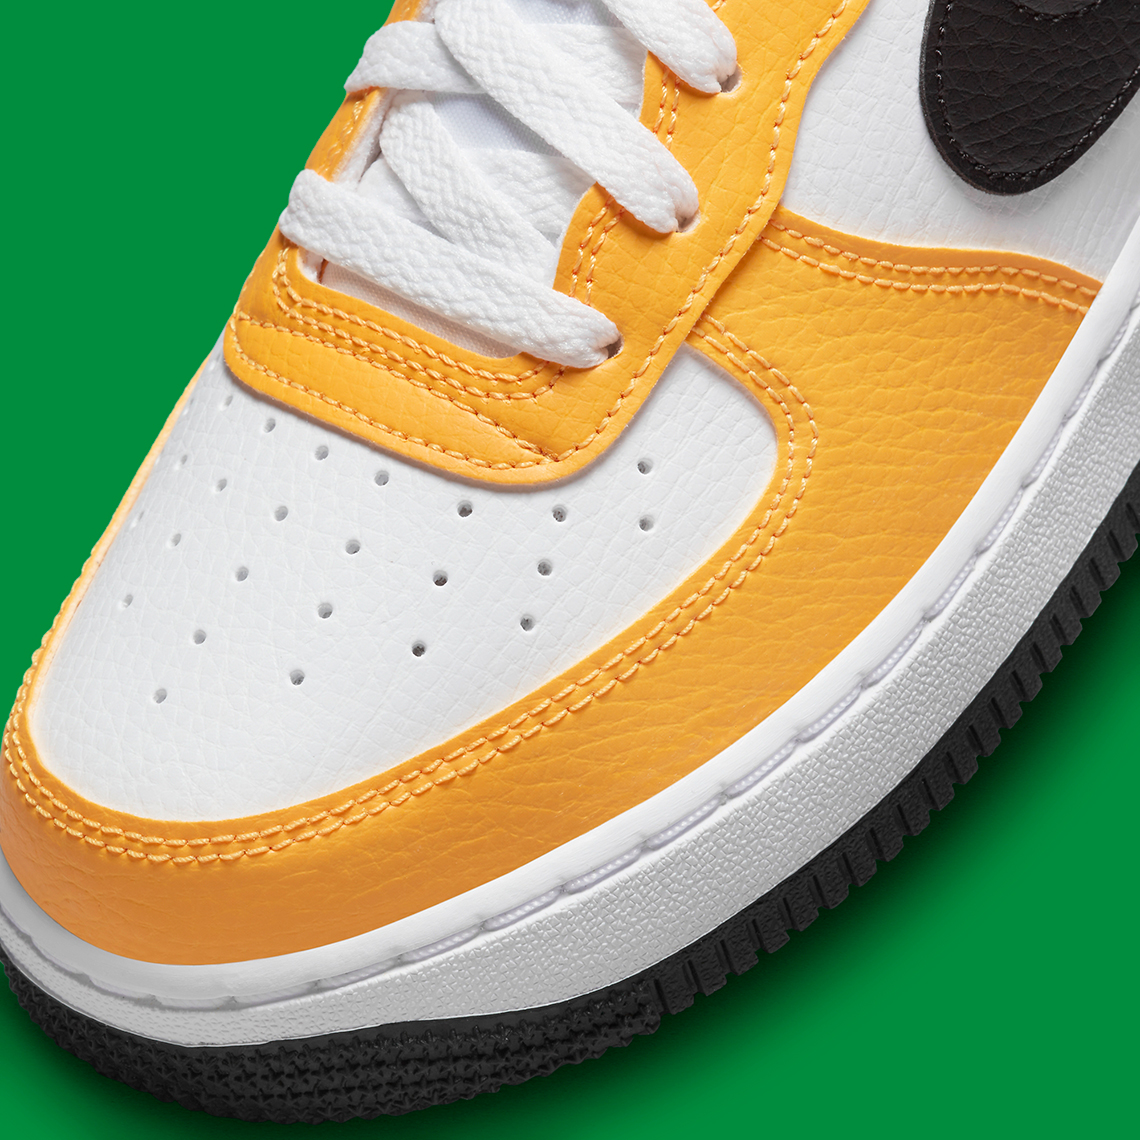 Nike Air Force 1 Low Oakland Athletics Fn8008 700 8